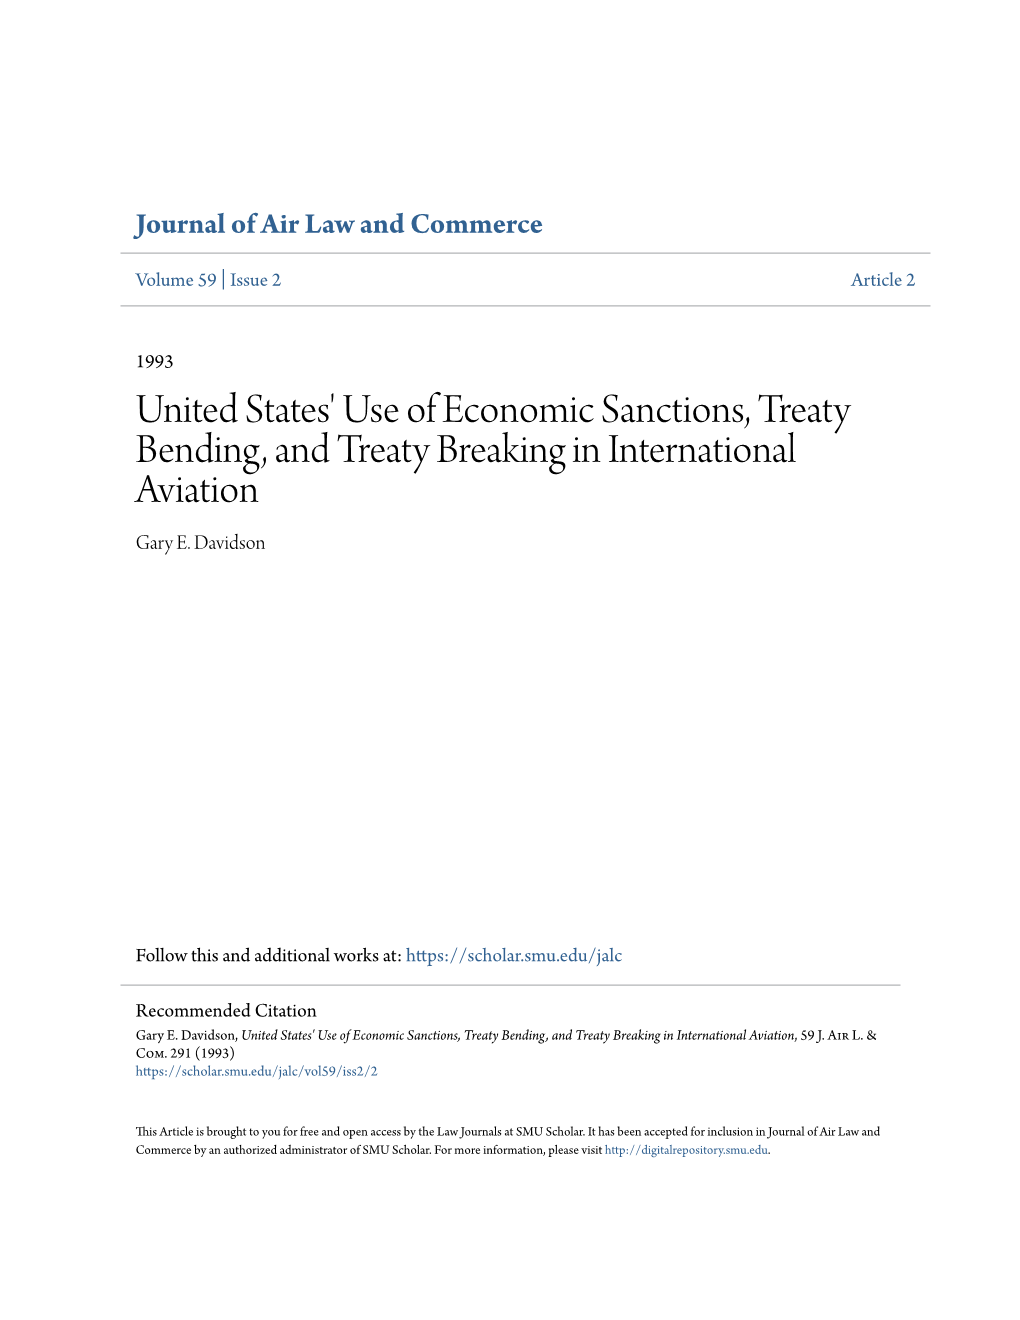 United States' Use of Economic Sanctions, Treaty Bending, and Treaty Breaking in International Aviation Gary E